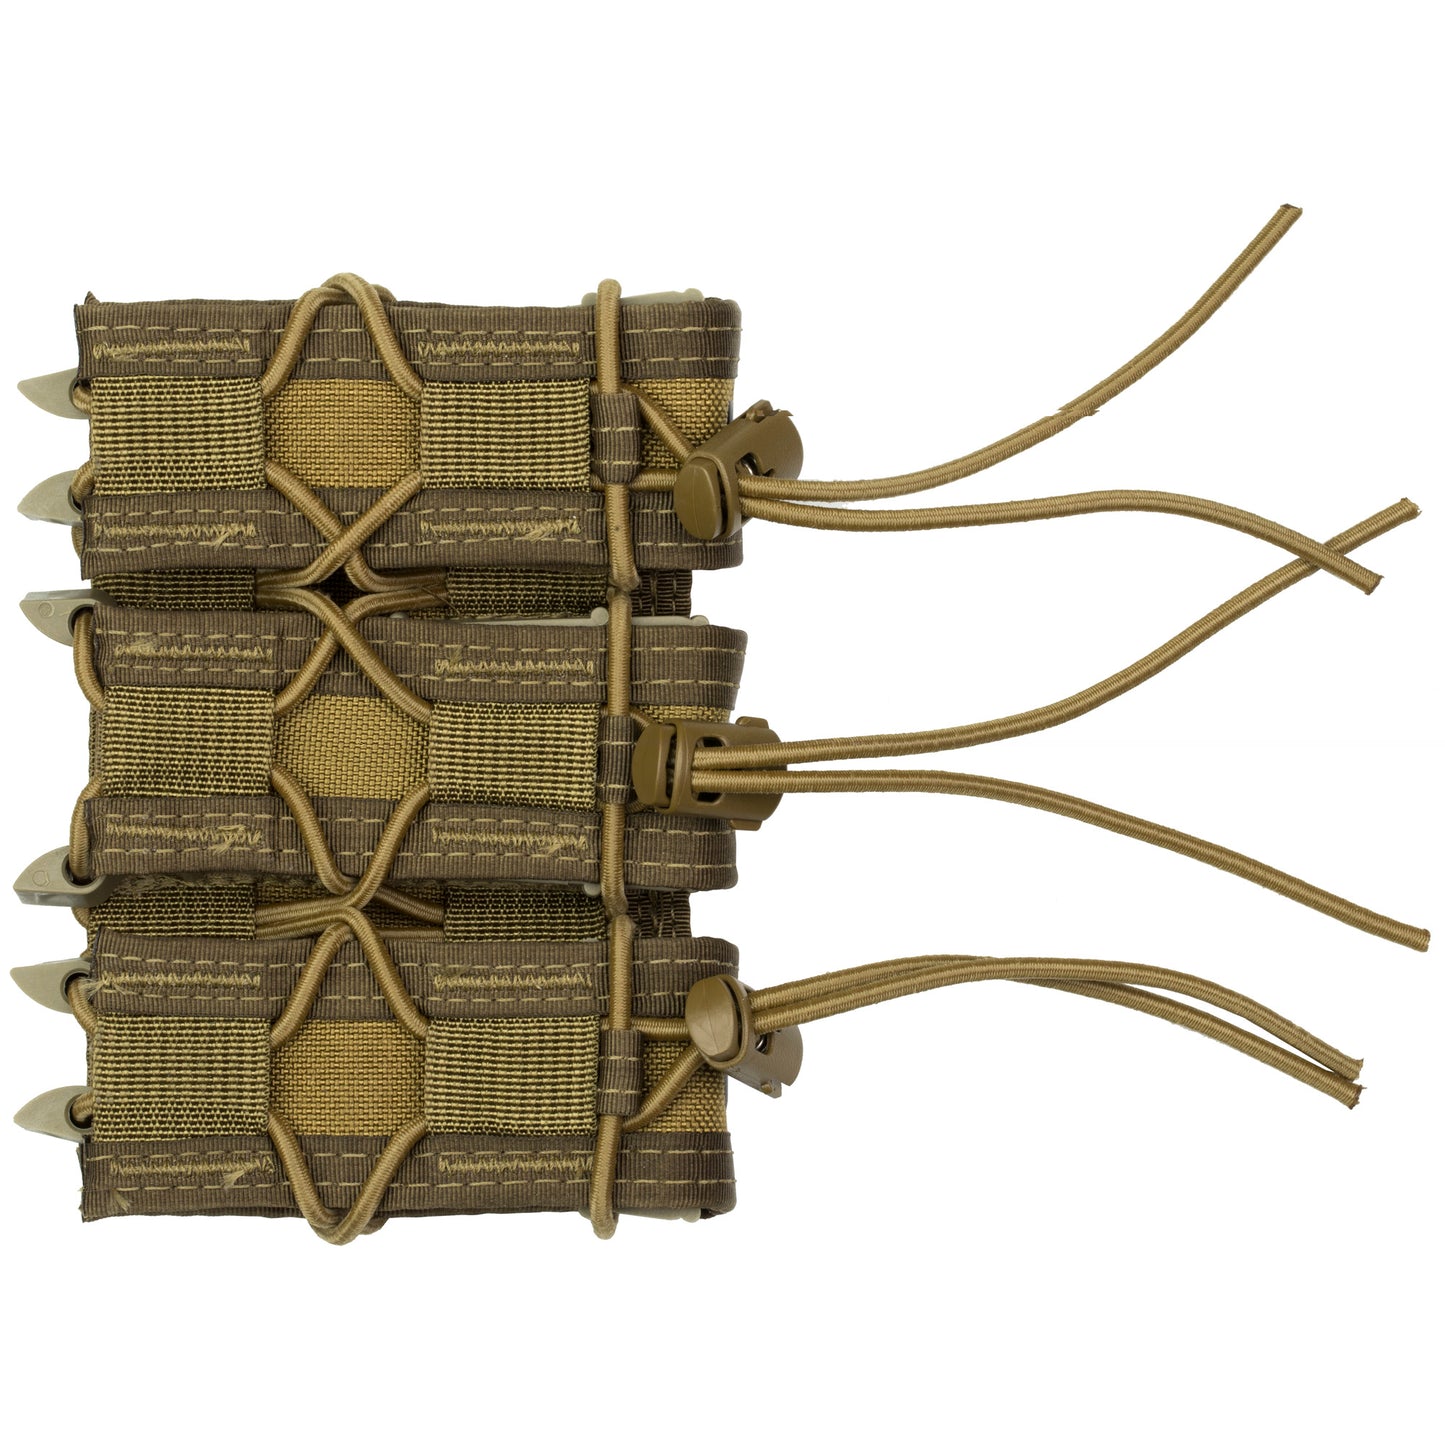 High Speed Gear, Pistol TACO, Triple Magazine Pouch, MOLLE, Fits Most Pistol Magazines, Hybrid Kydex and Nylon, Coyote Brown